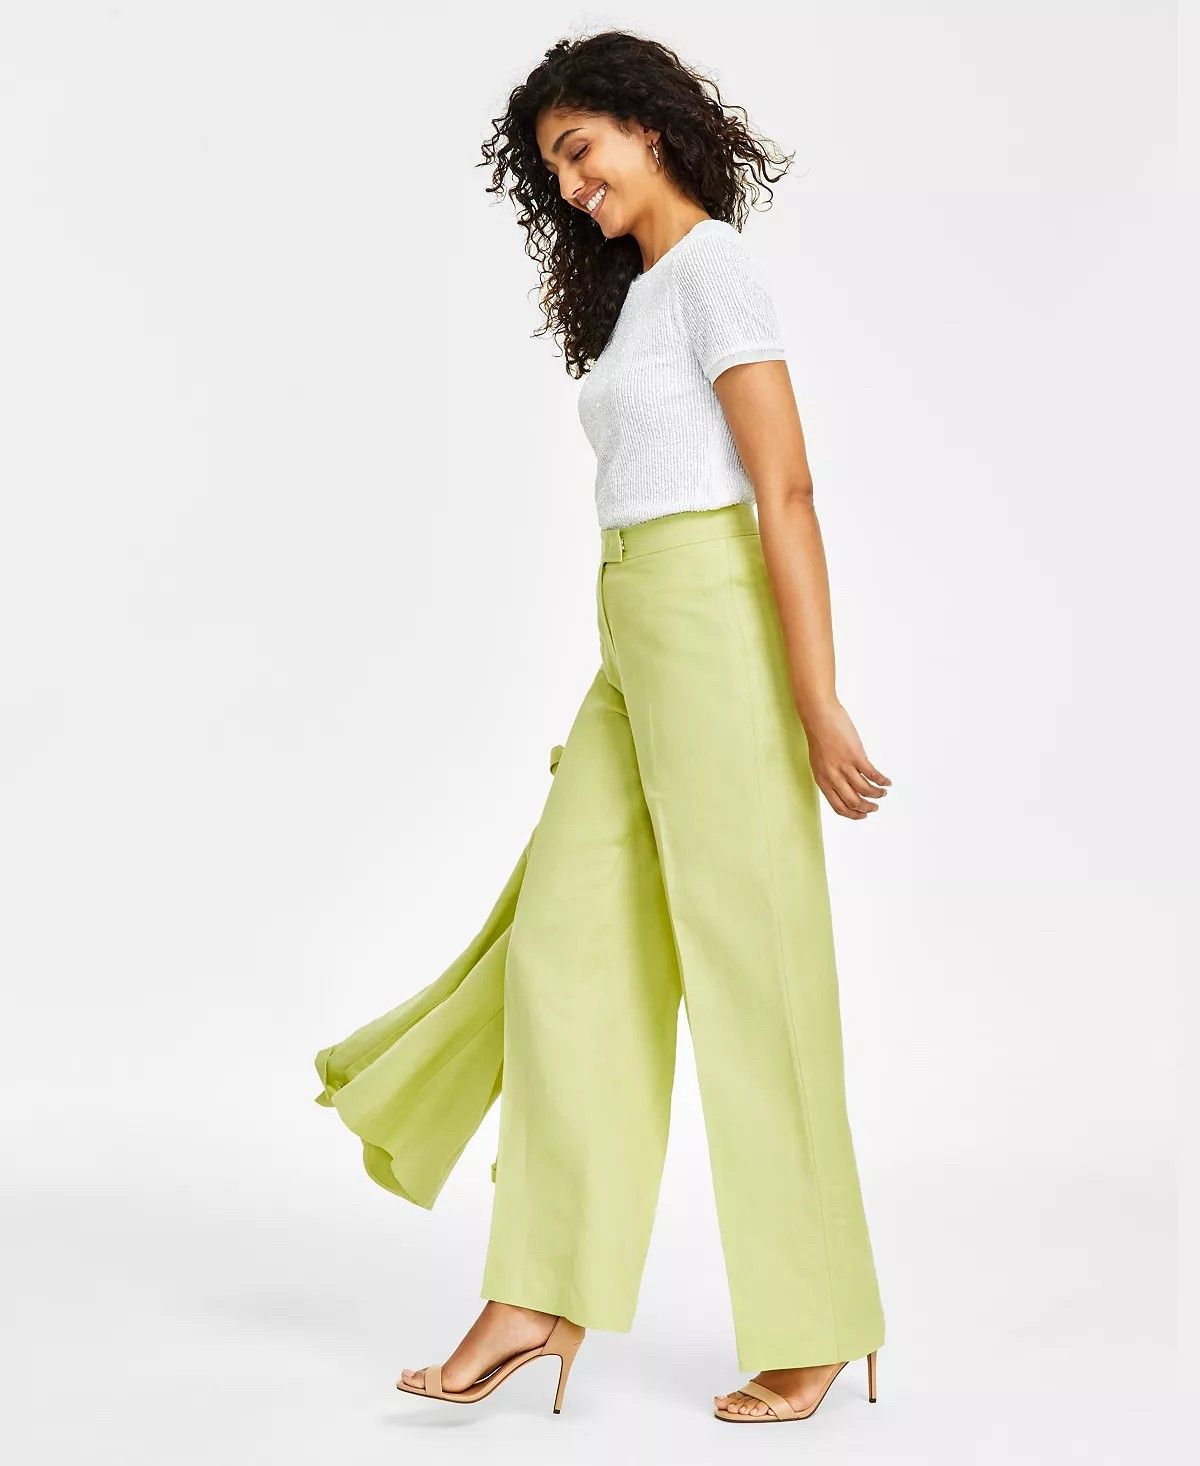 These Linen Pants Outfit Ideas Prove They're A Summer 2023 Staple